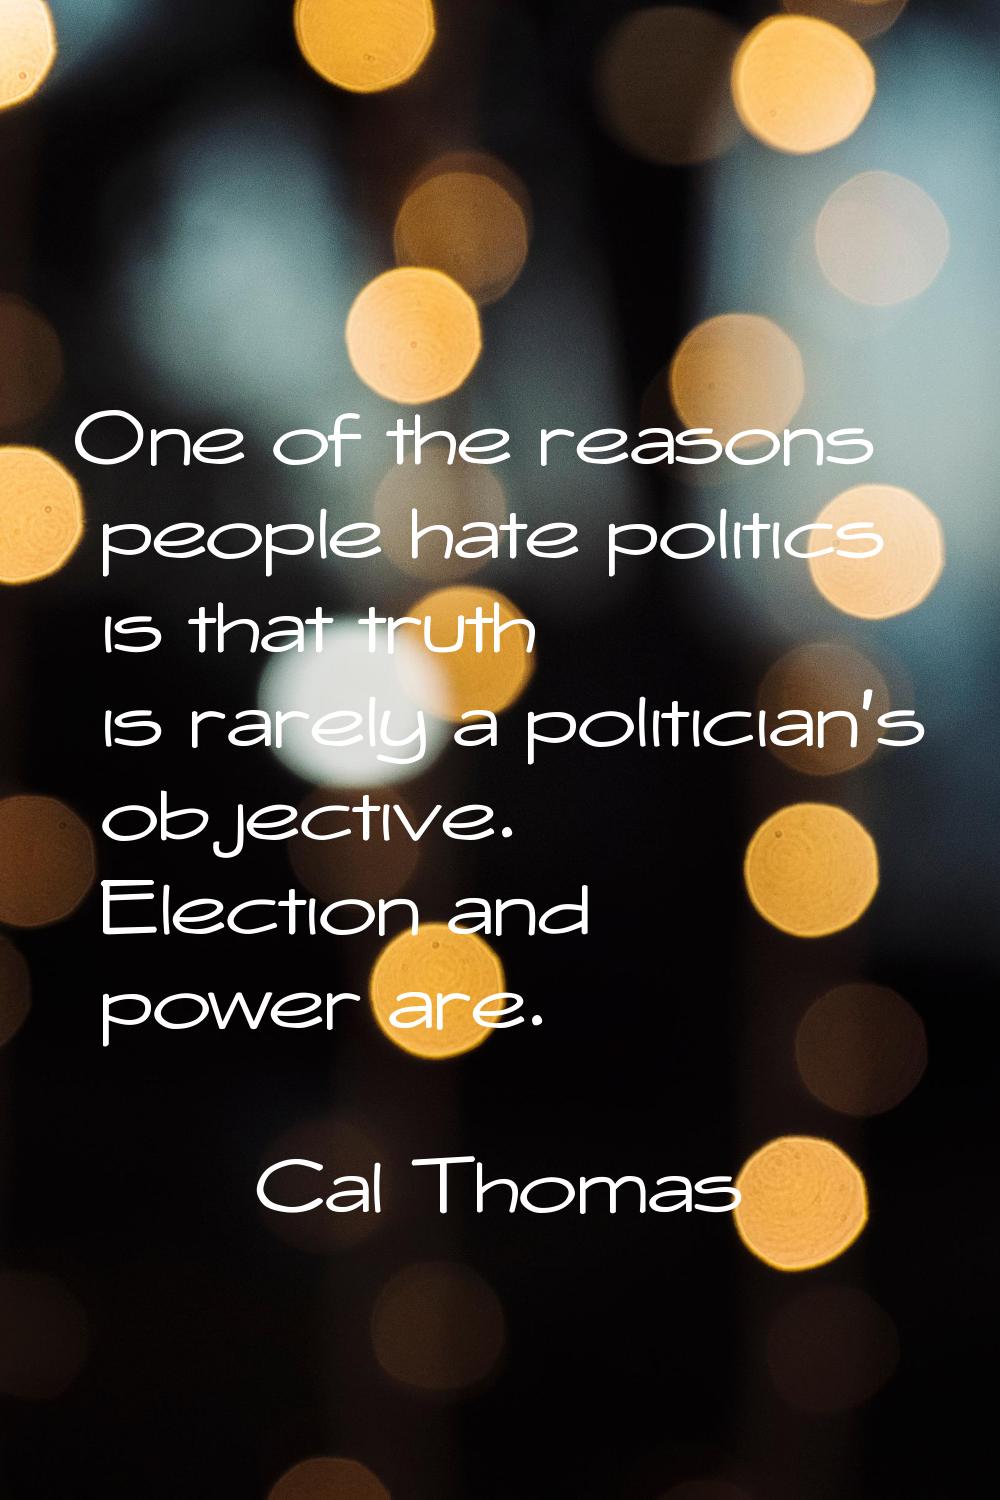 One of the reasons people hate politics is that truth is rarely a politician's objective. Election 